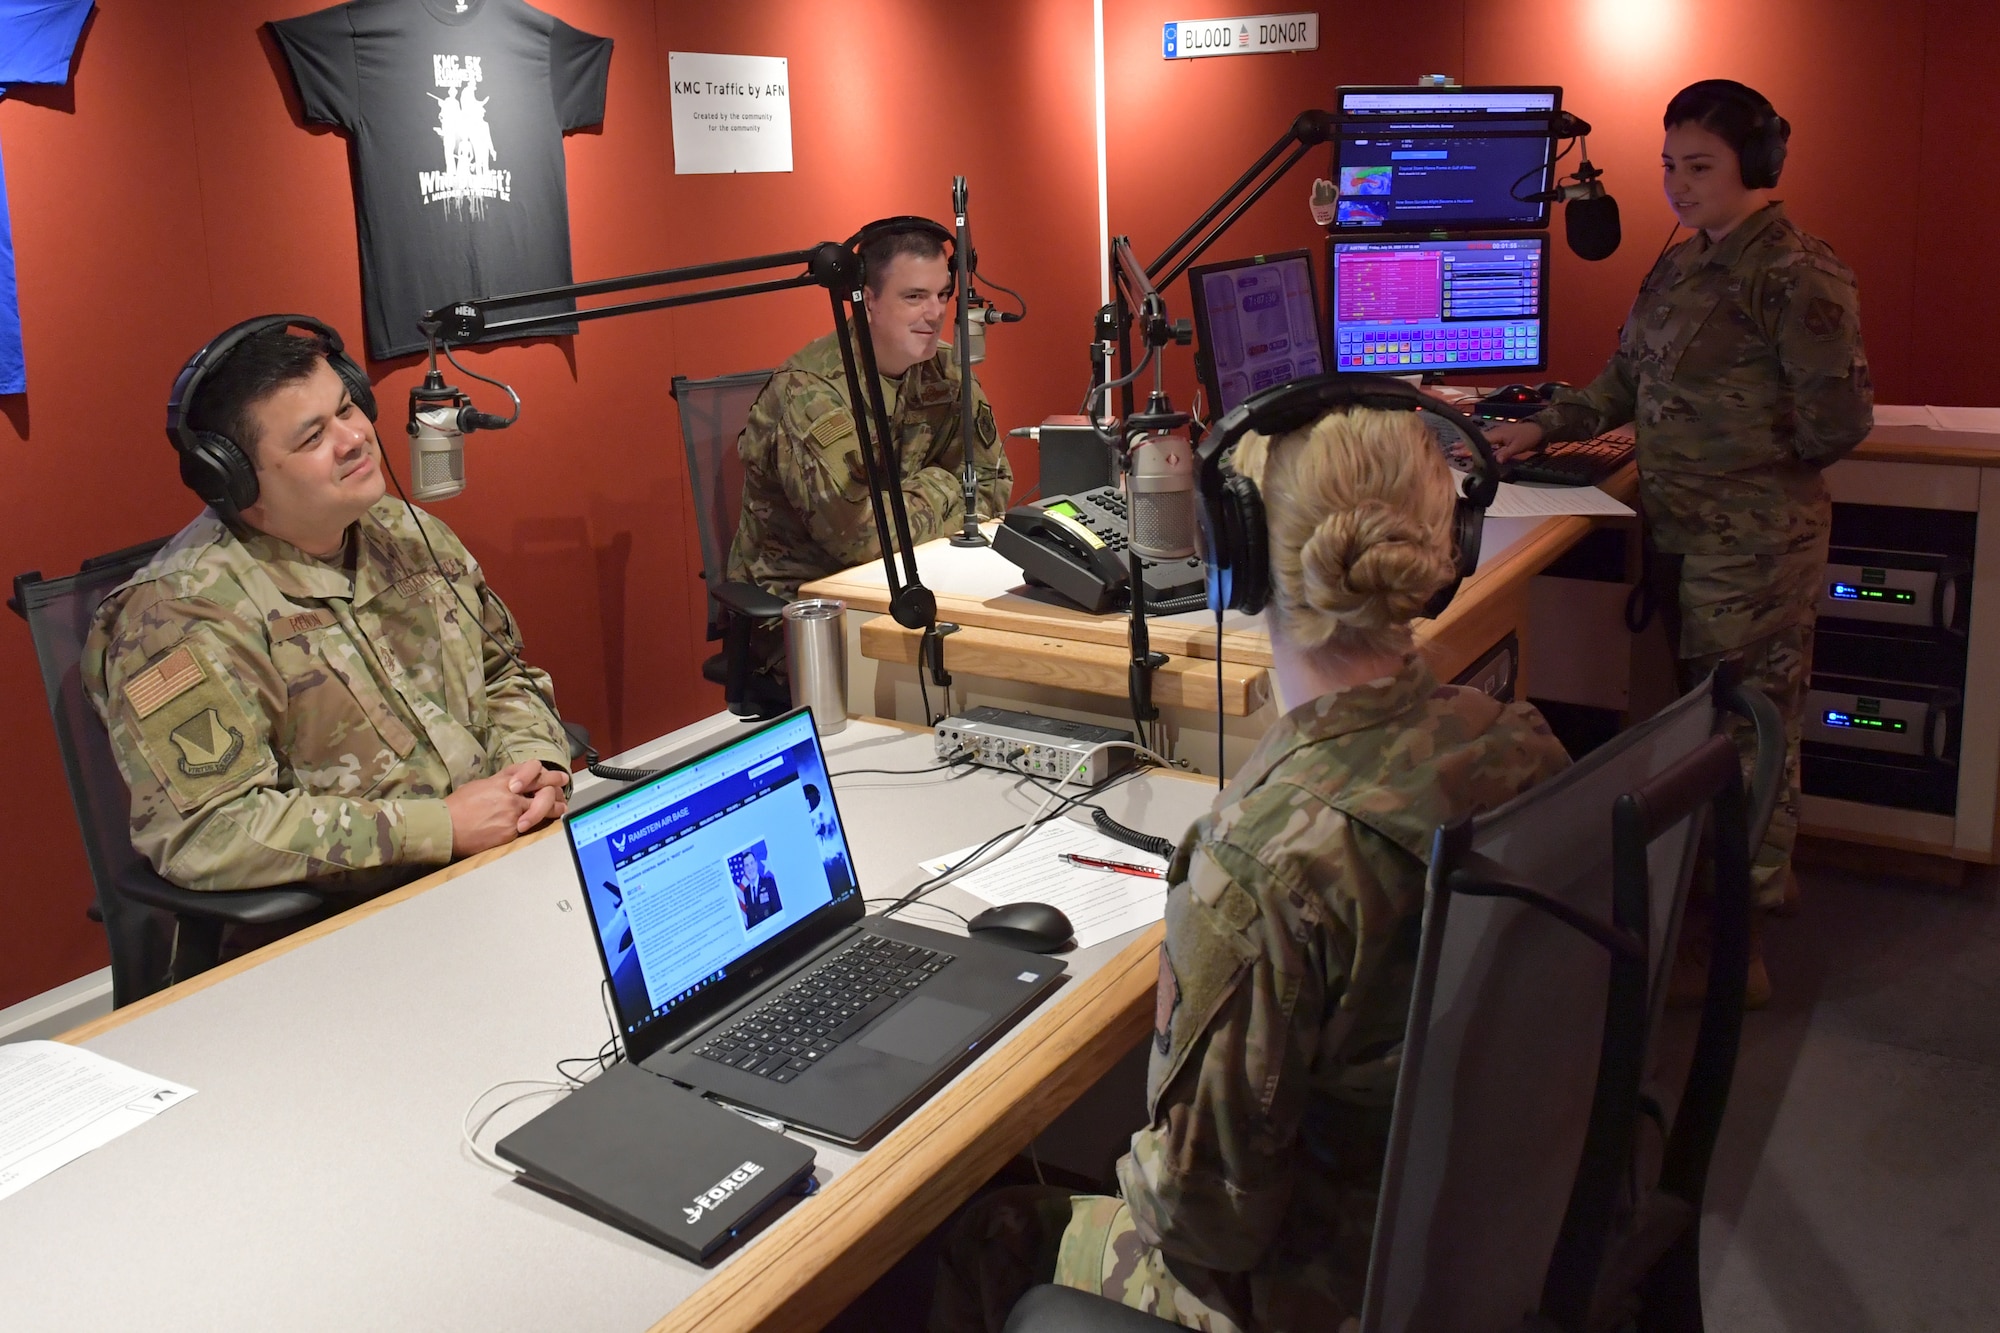 A group of Airmen sitting and standing in a radio station studio.